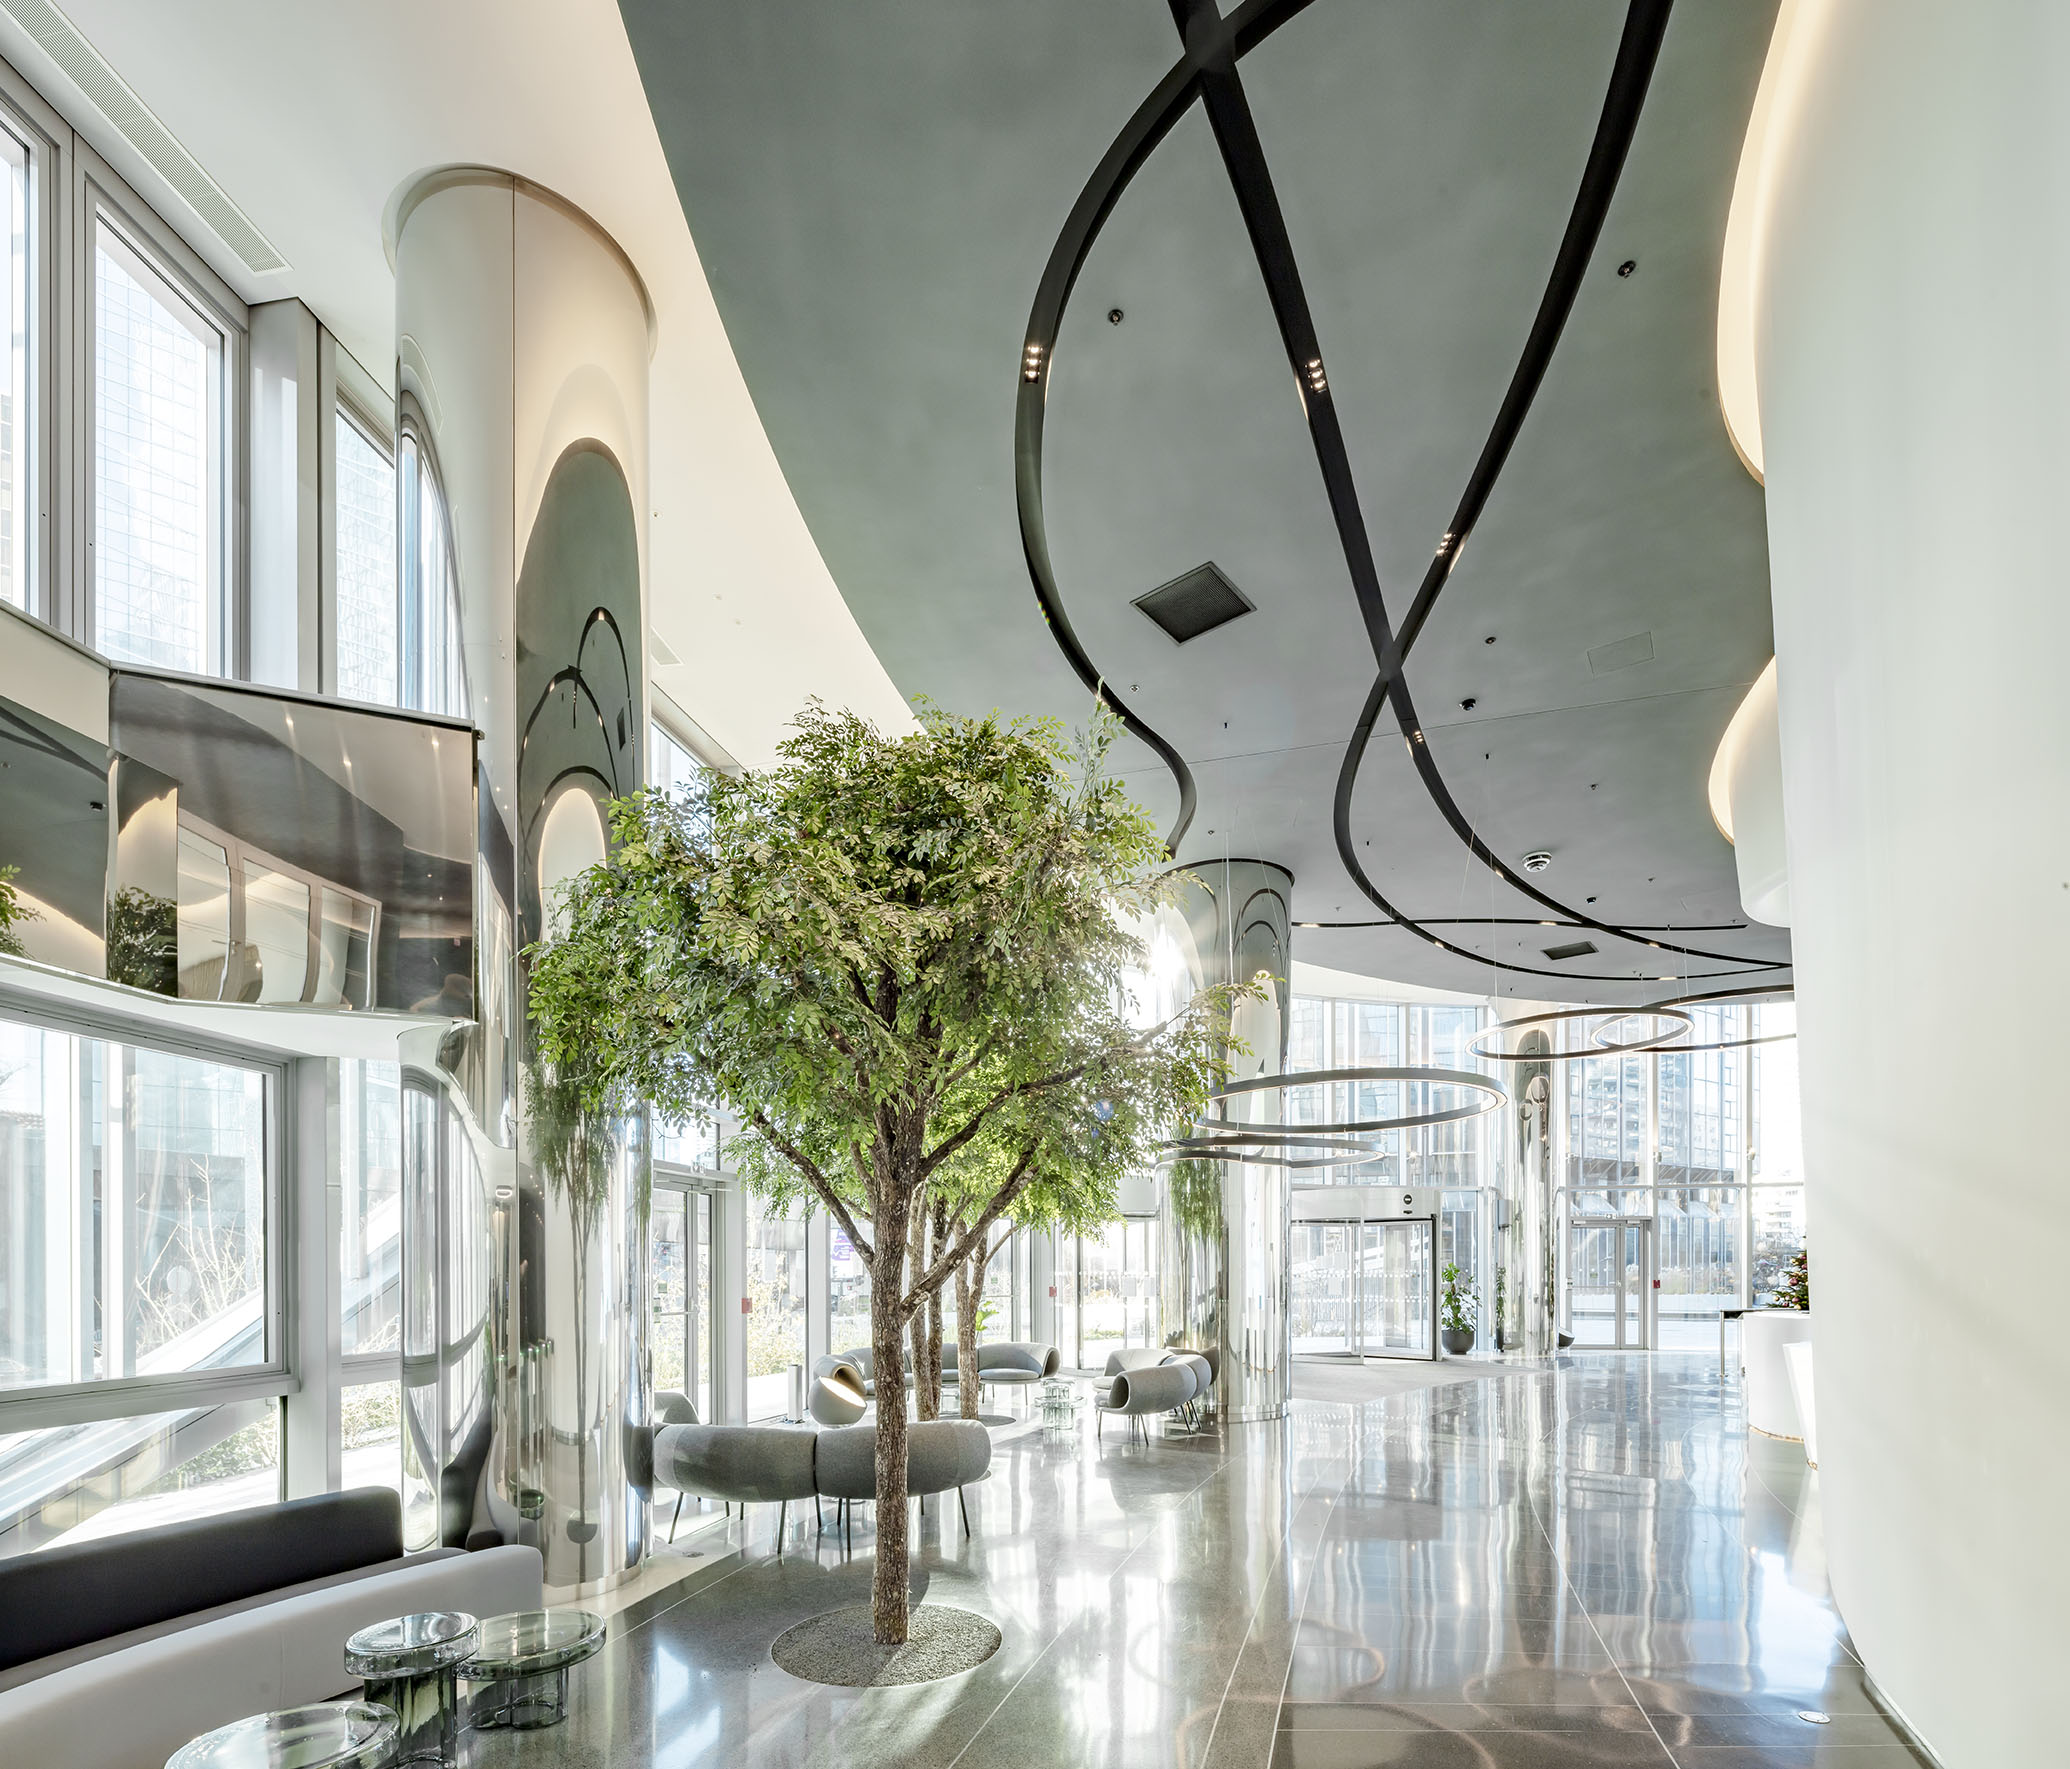 Planted hall of the Alto Tower at La Défense in Paris designed by the interior design studio jean-philippe nuel, in the heart of the business district of the capital, tertiary, corporate design, interior design